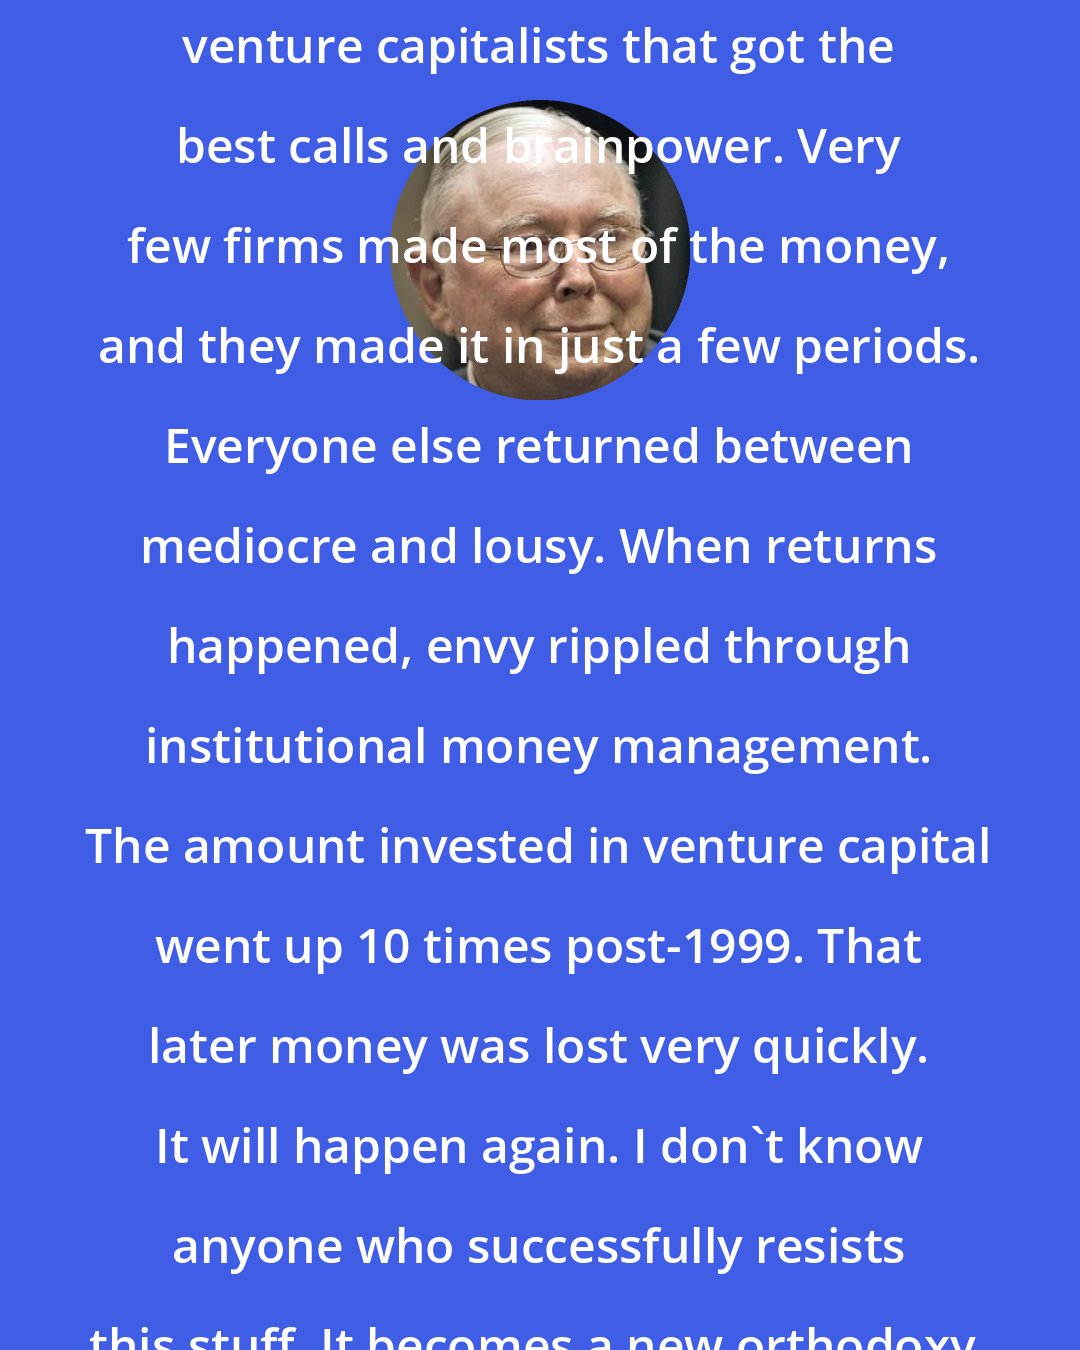 Charlie Munger: Harvard and Yale concentrated with venture capitalists that got the best calls and brainpower. Very few firms made most of the money, and they made it in just a few periods. Everyone else returned between mediocre and lousy. When returns happened, envy rippled through institutional money management. The amount invested in venture capital went up 10 times post-1999. That later money was lost very quickly. It will happen again. I don't know anyone who successfully resists this stuff. It becomes a new orthodoxy.